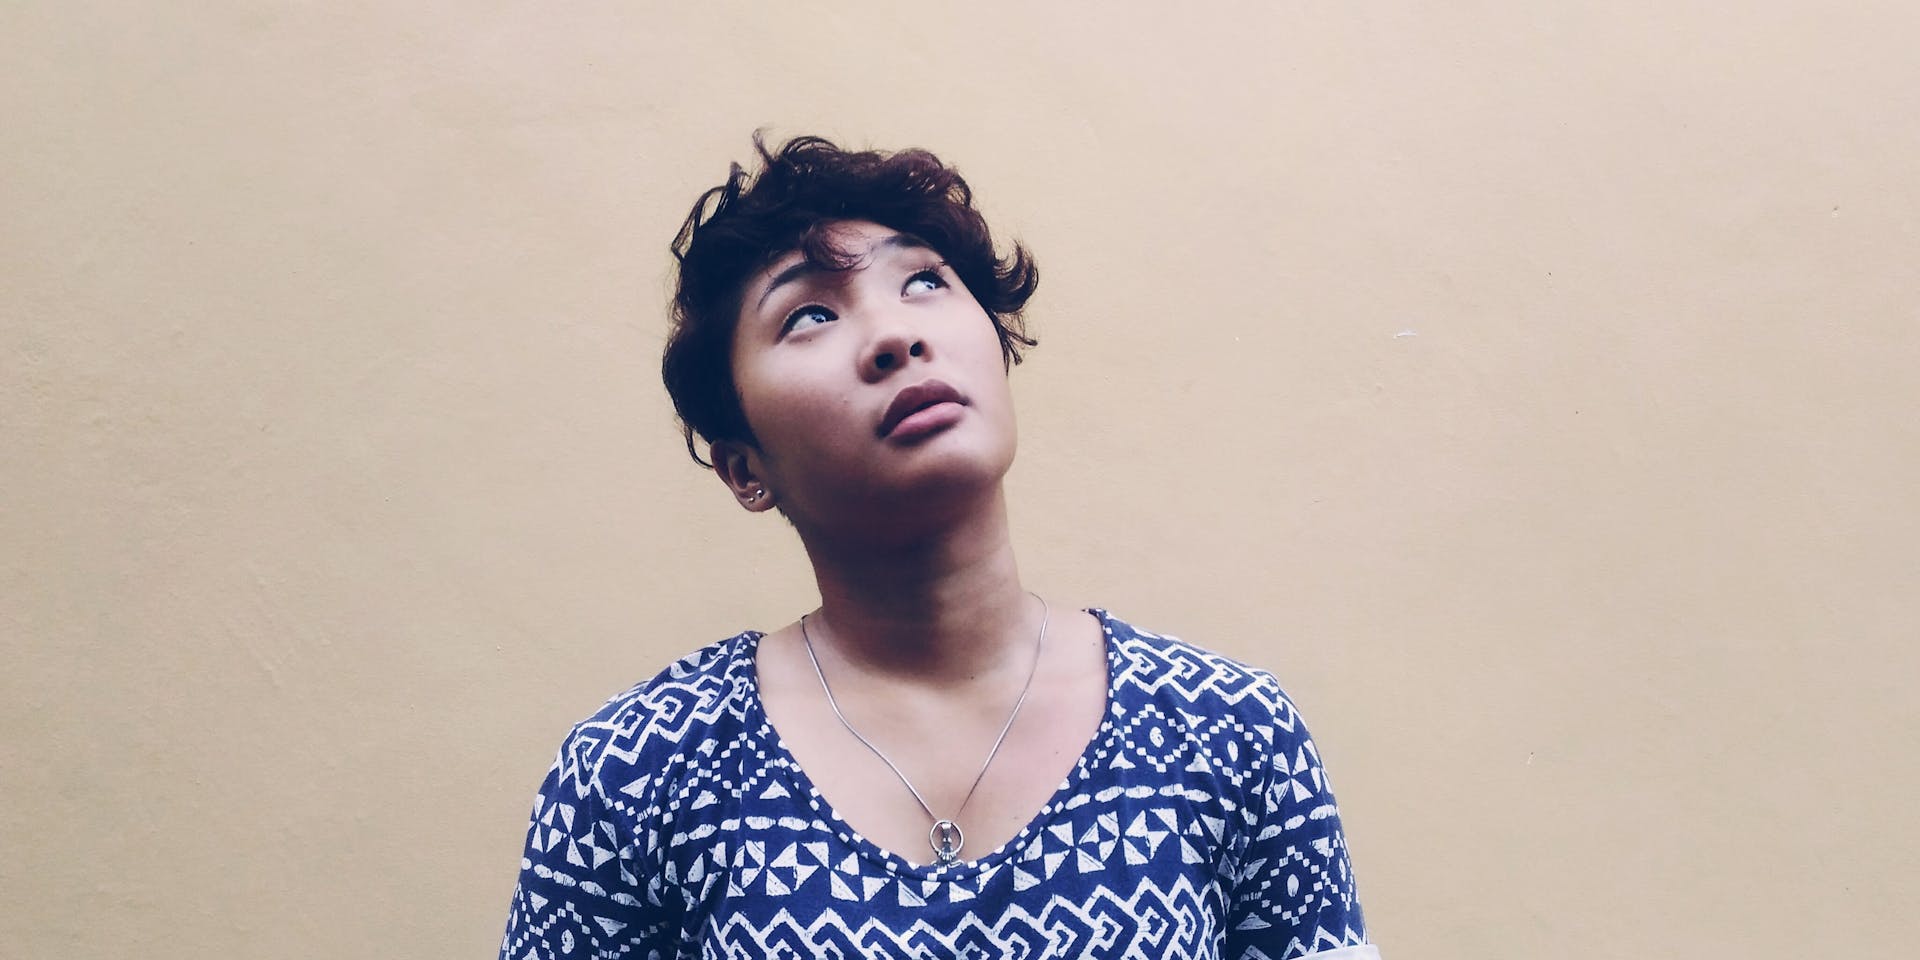 A Filipino woman with short dark hair is standing against a light brown wall staring upwards pensively